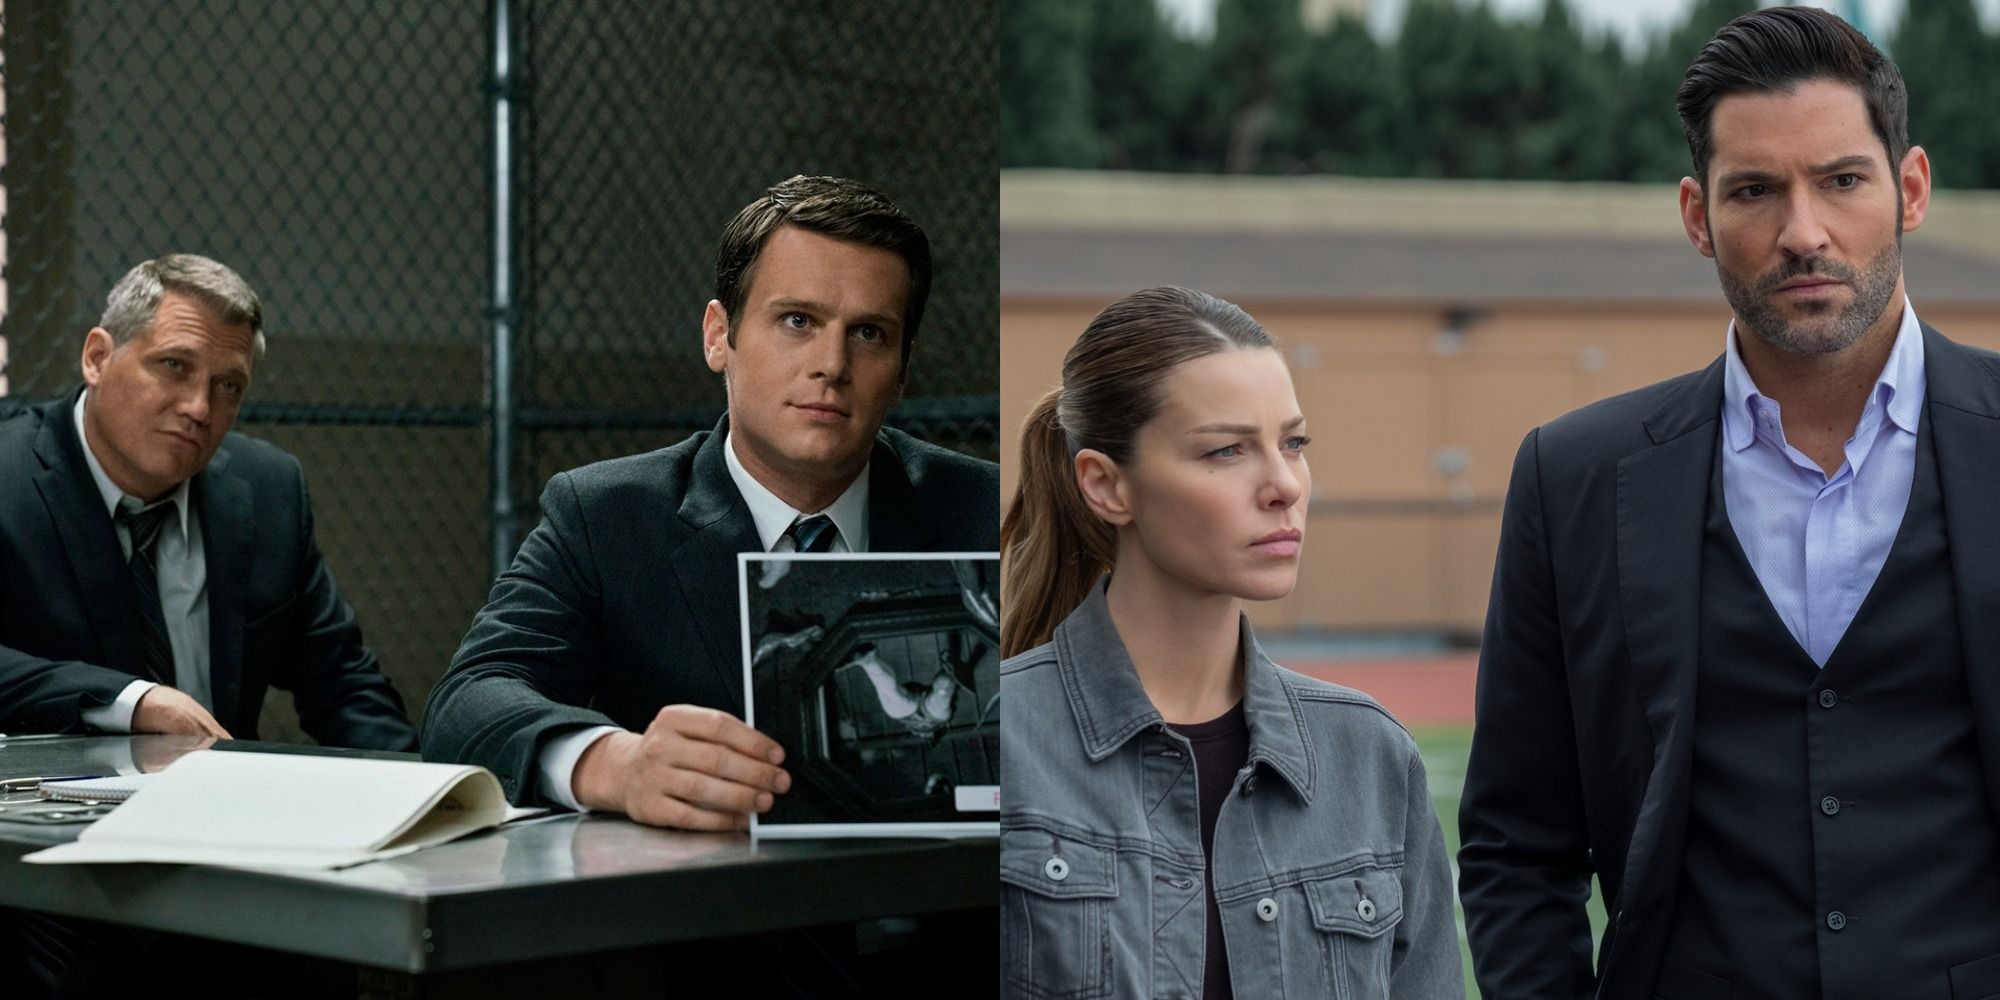 Split image showing scenes from the shows Mindhunter and Lucifer